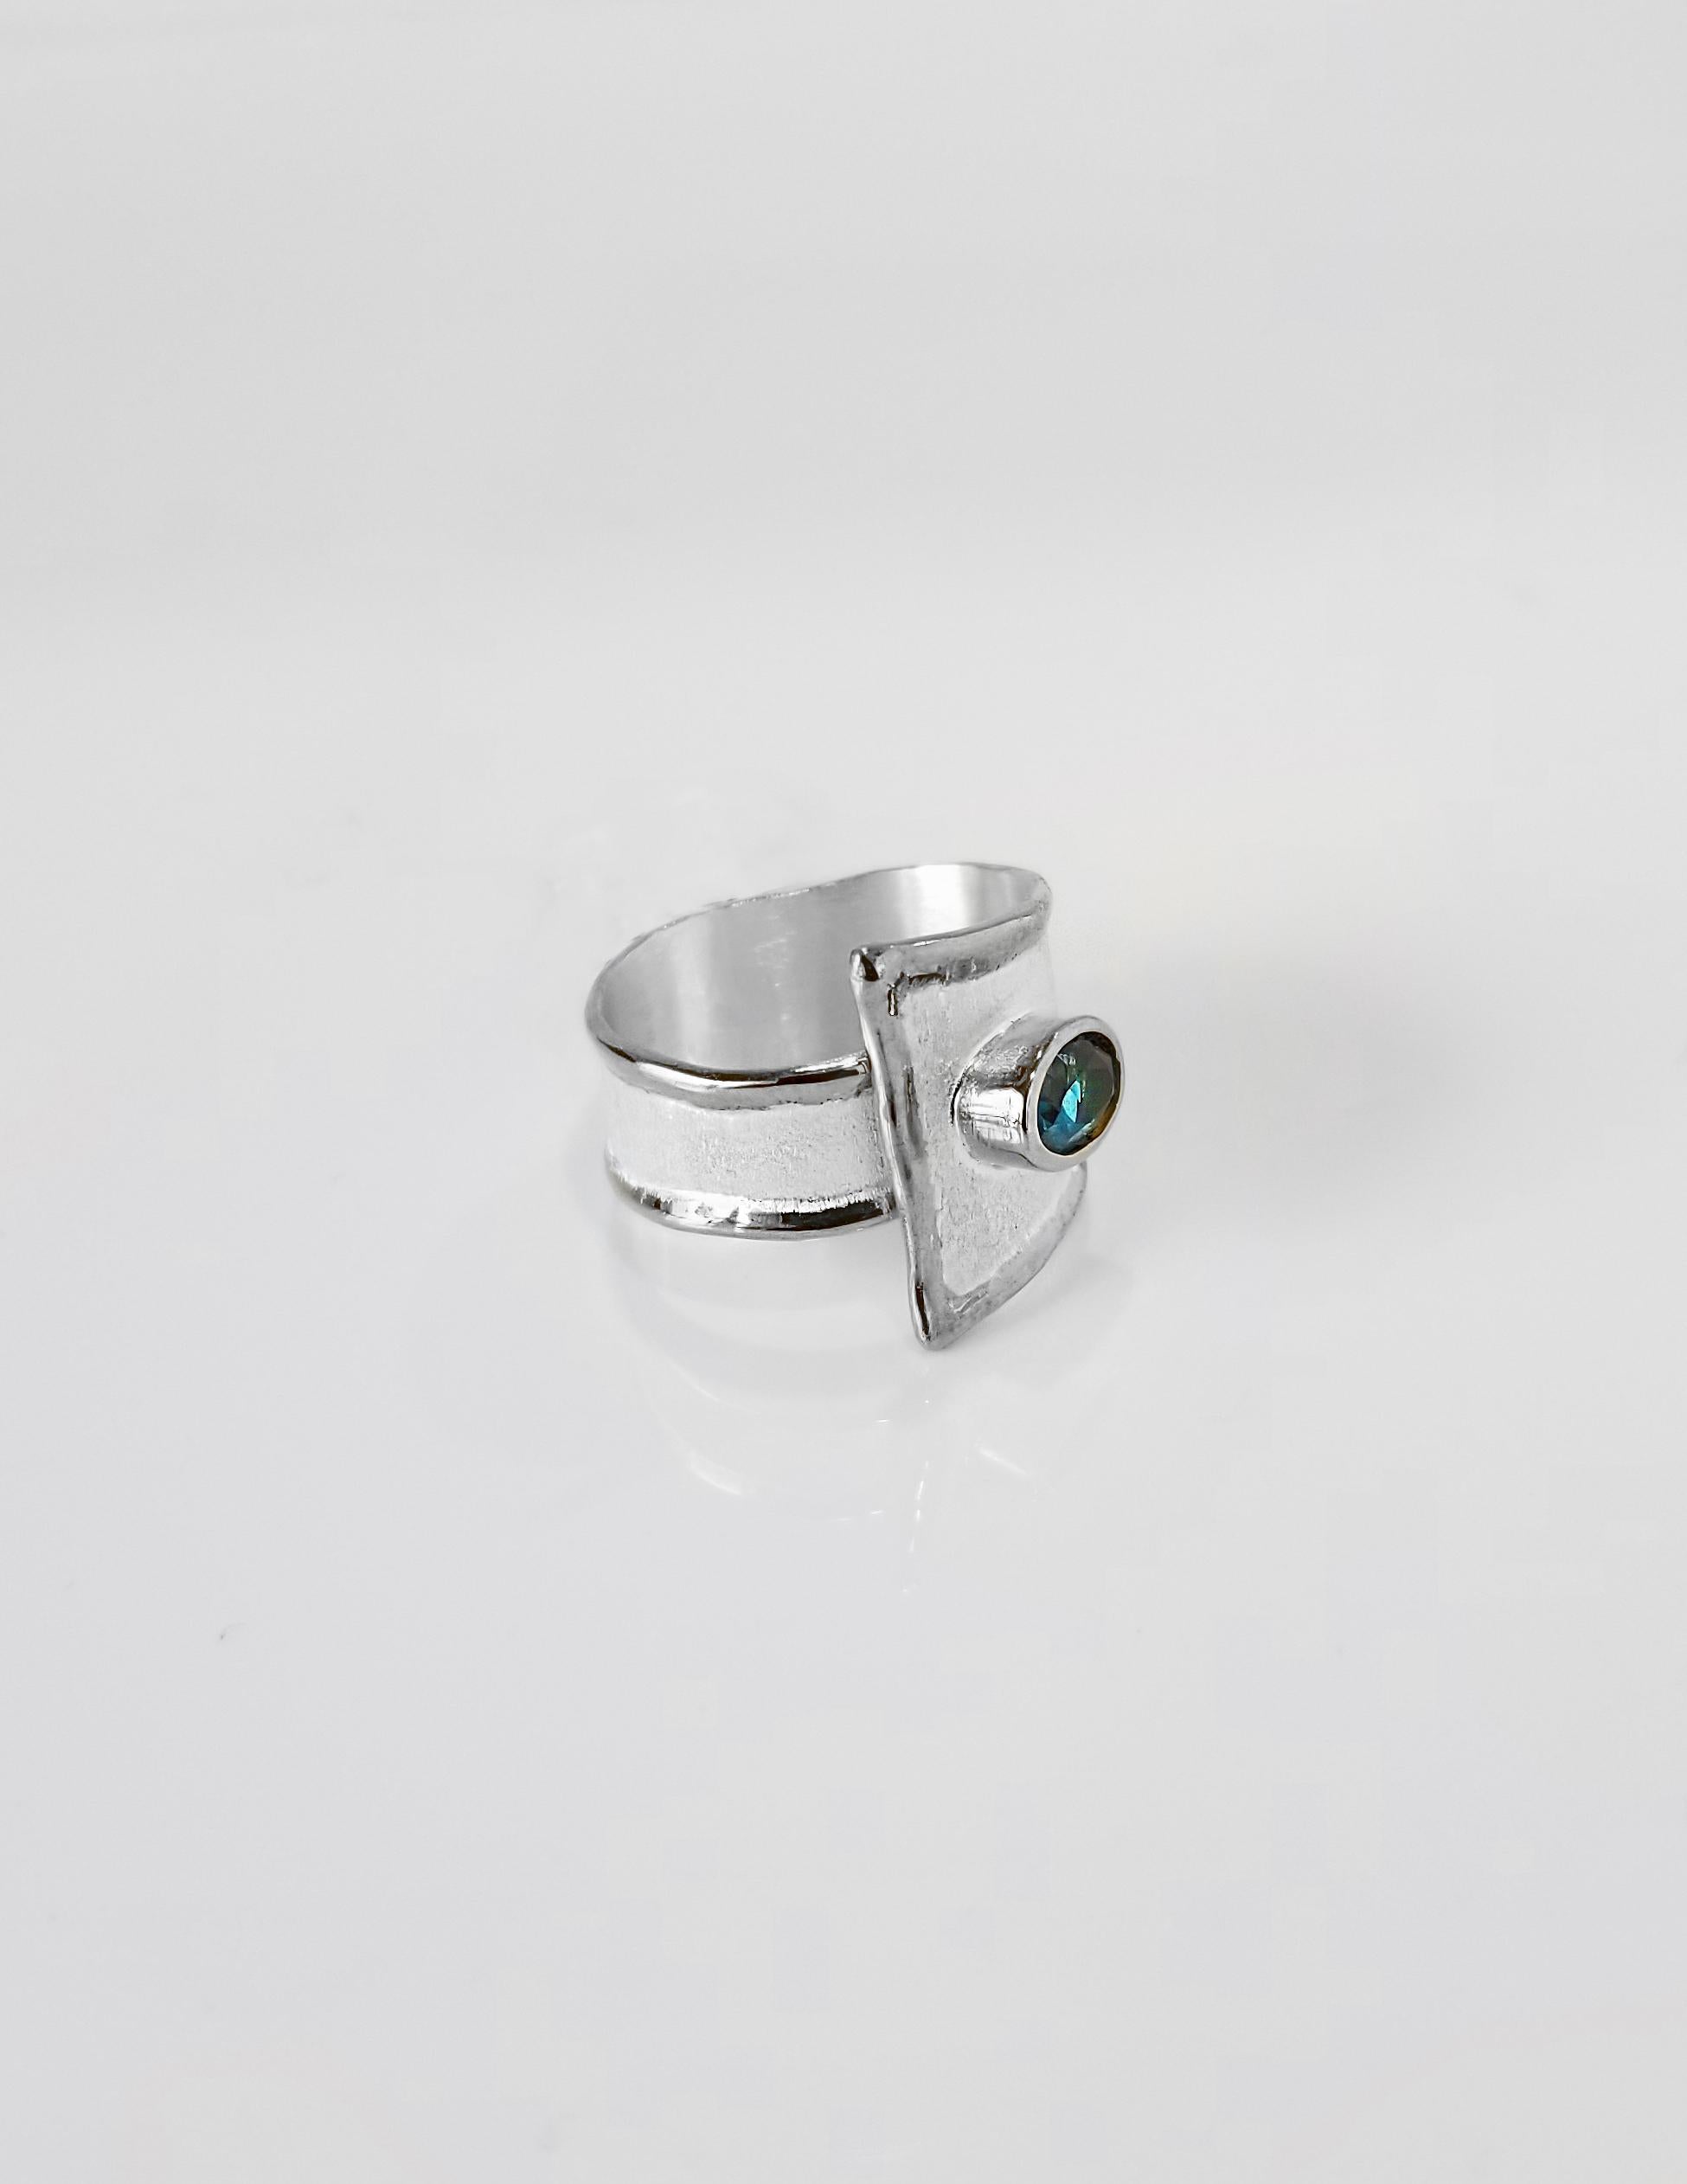 Contemporary Yianni Creations 1.60 Carat London Blue Topaz Fine Silver and Palladium Ring